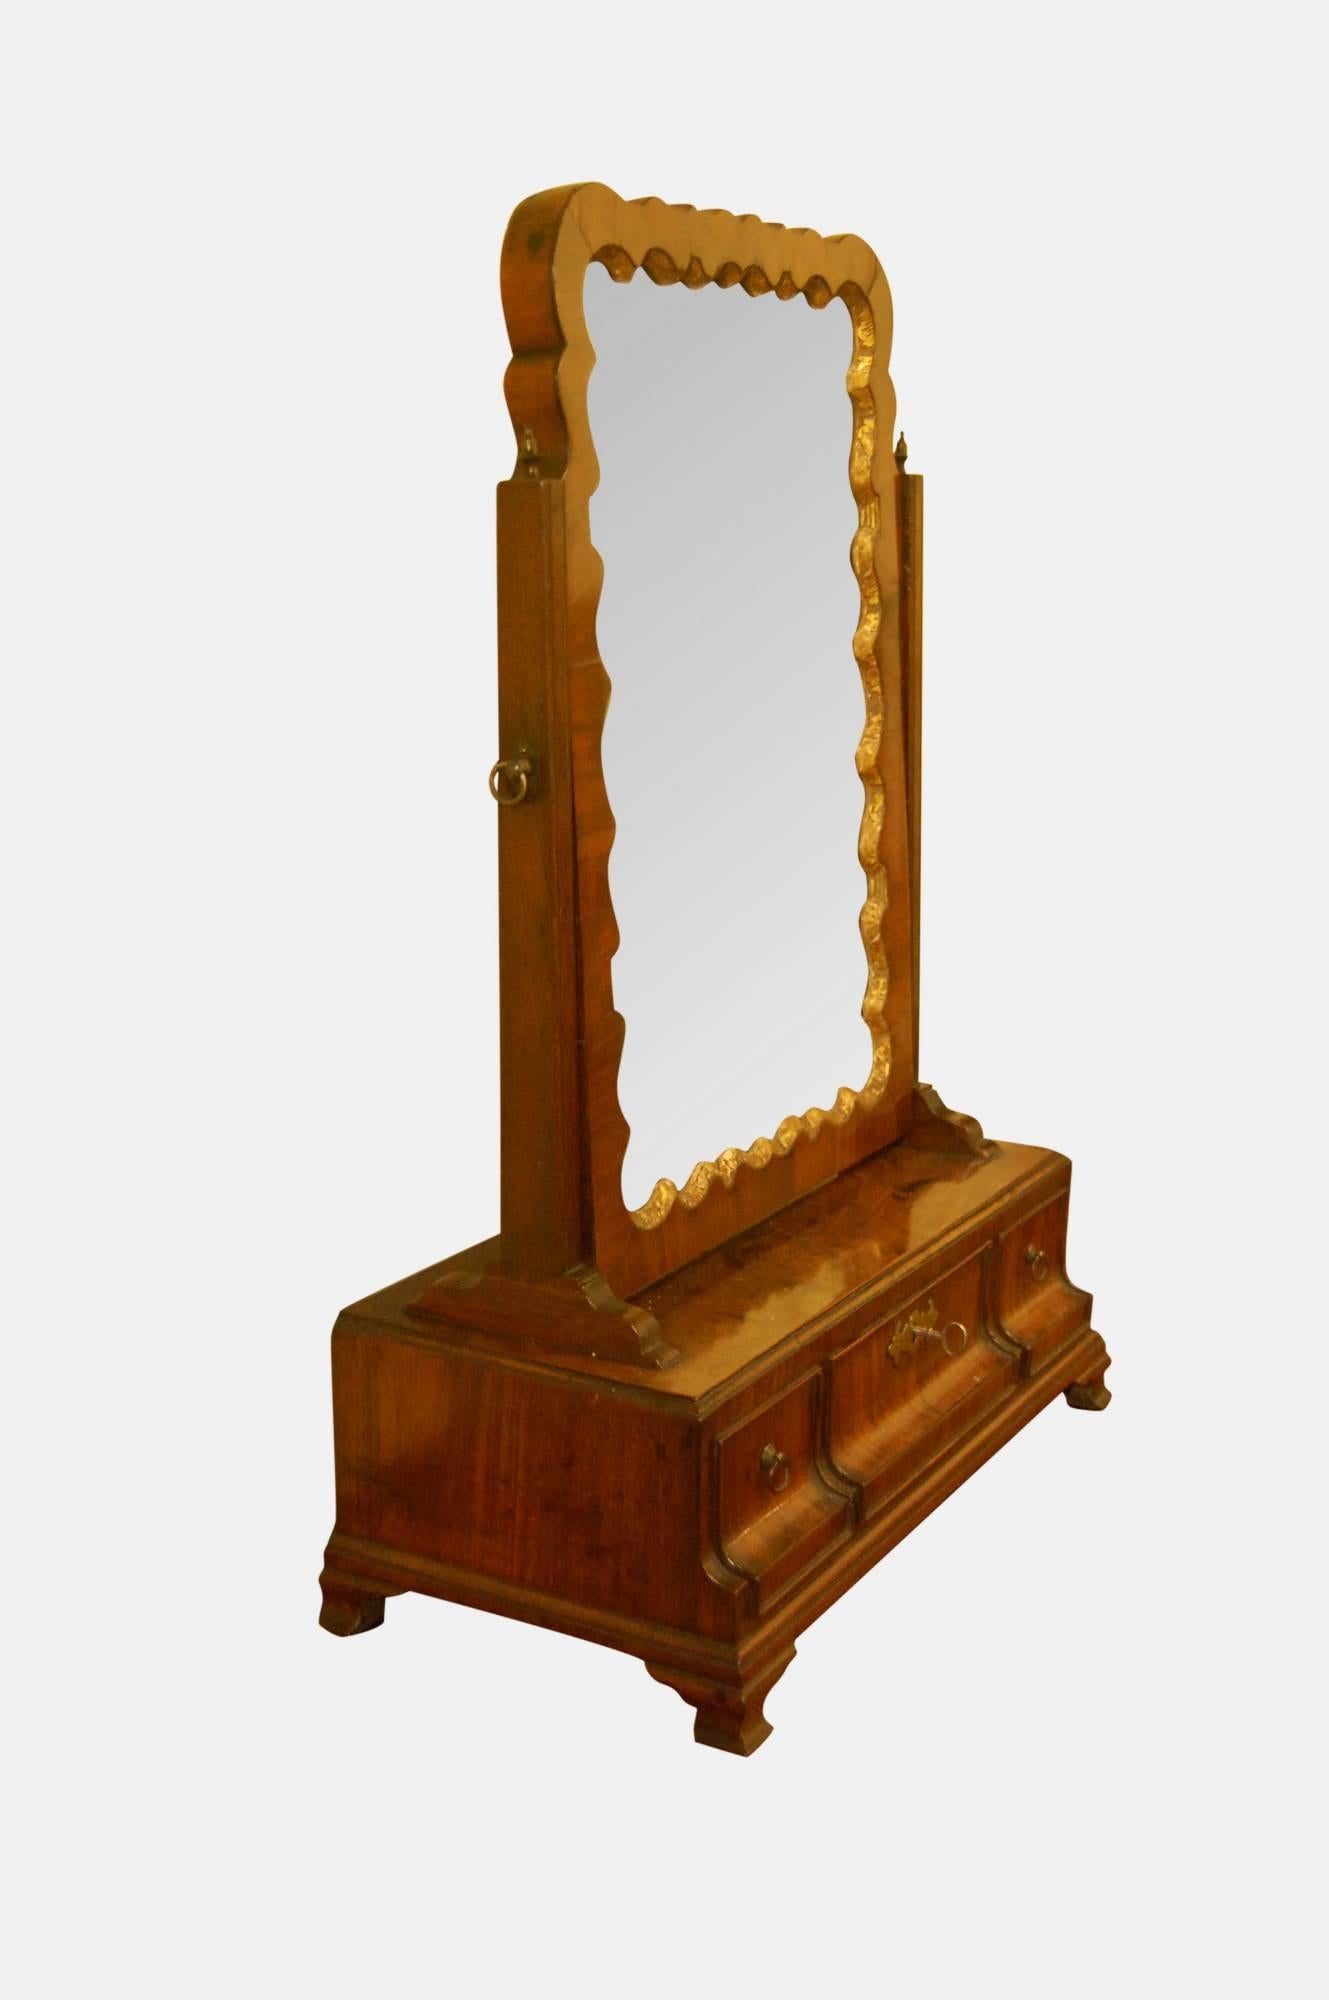 Mid-18th century mahogany and parcel gilt toilet glass

The three-drawer concave base raised on ogee feet

Mirror has serpentine carved gilt slip with original plate.